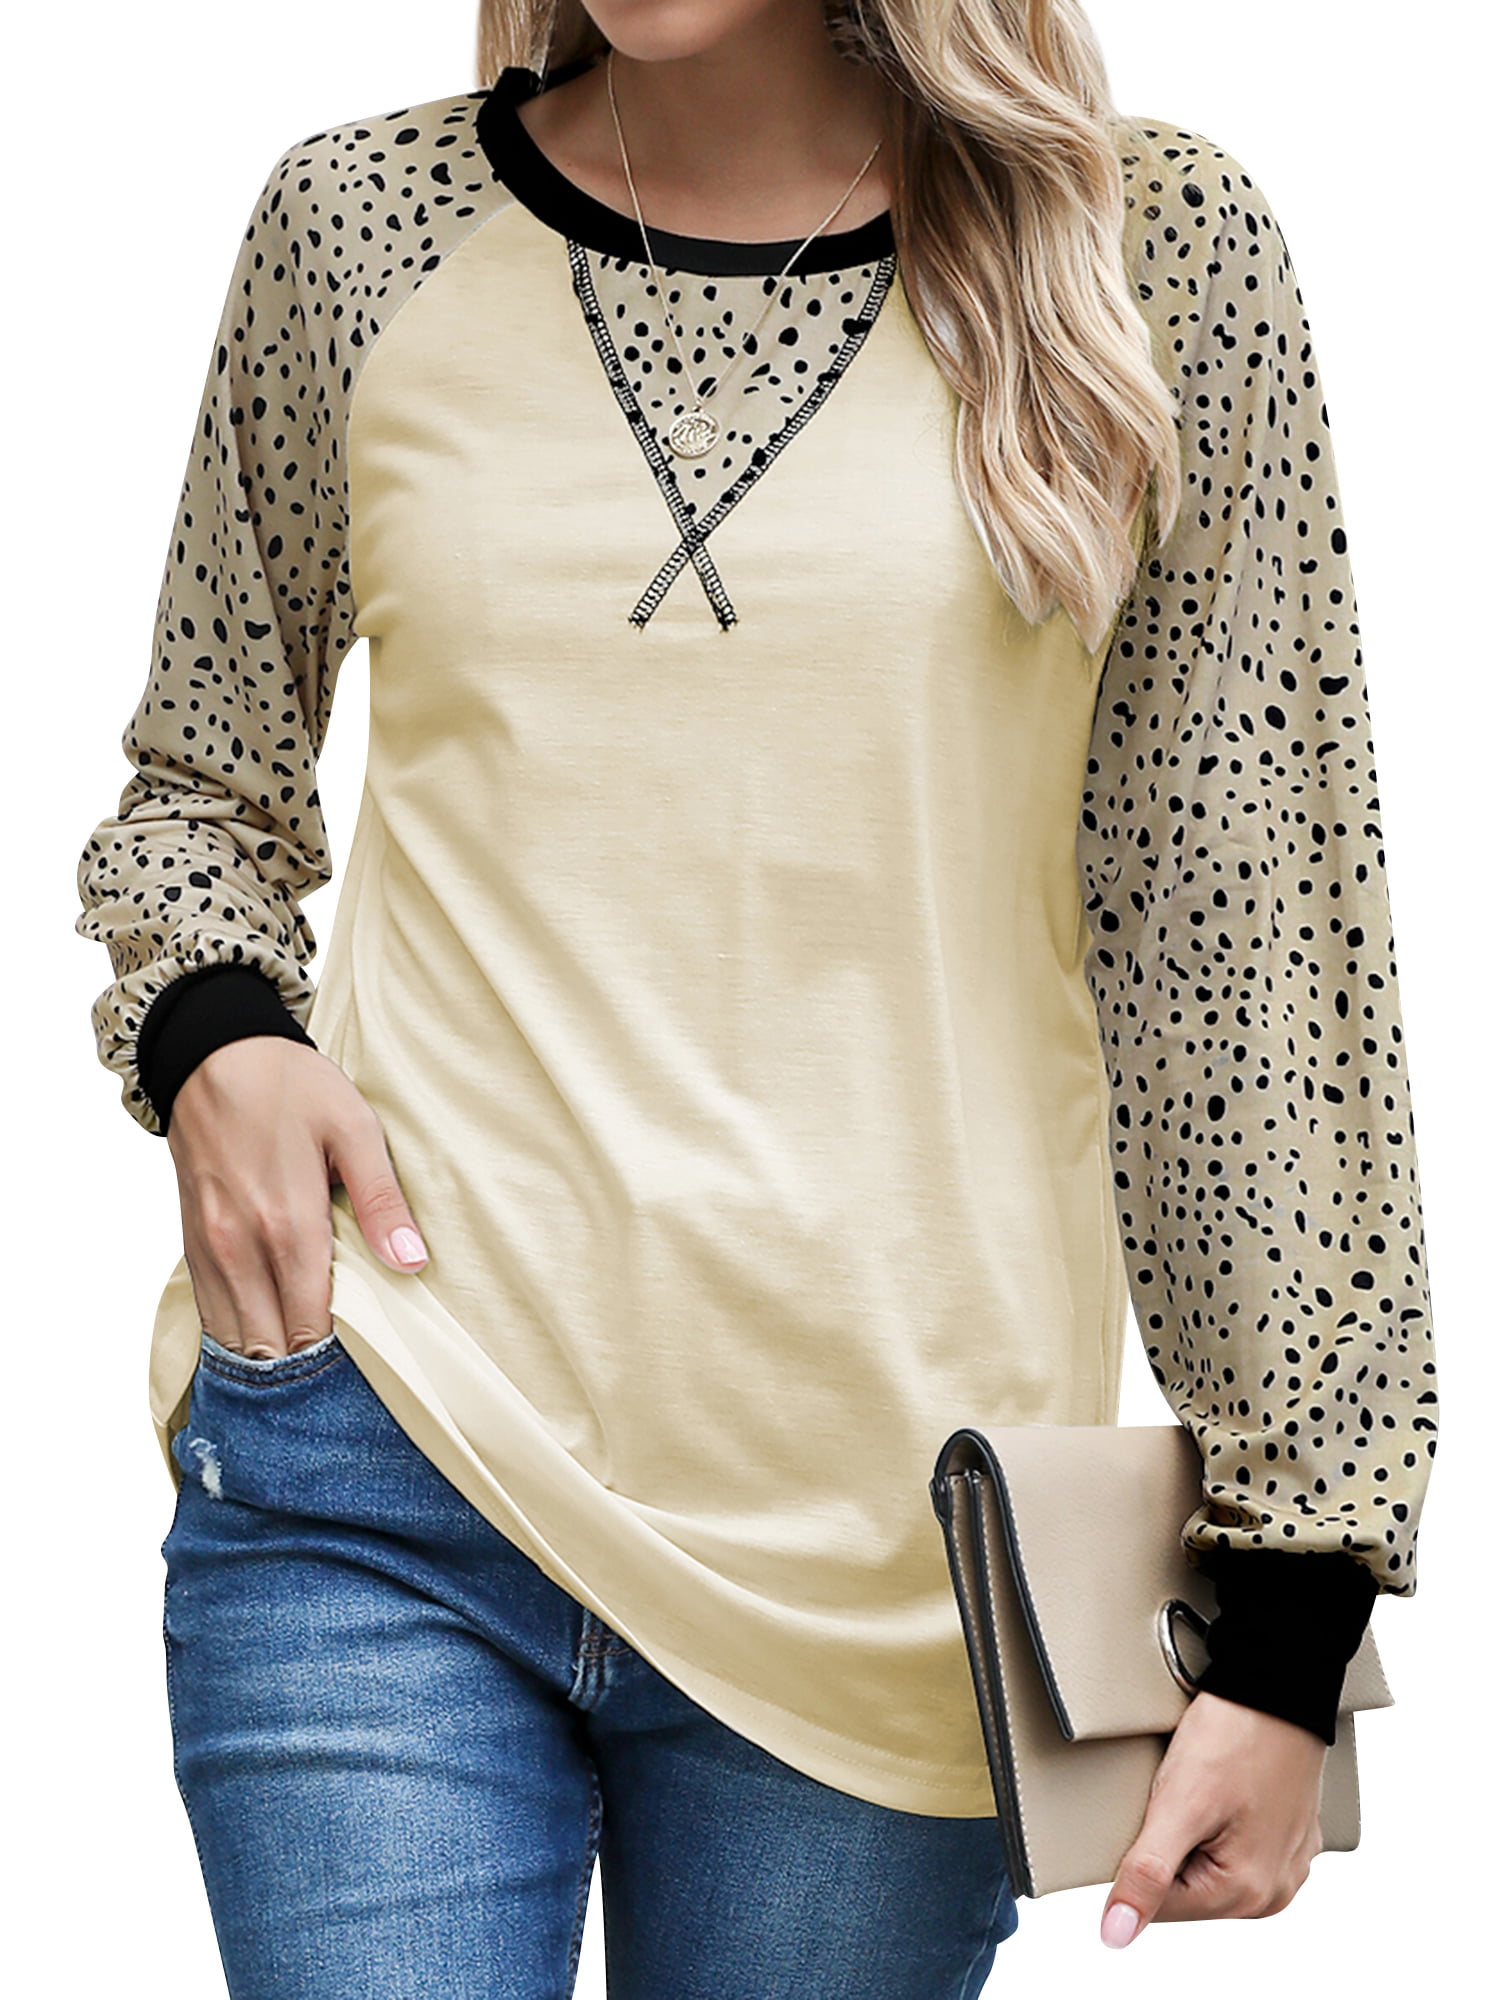 ZXZY Women Leopard Printed Colorblock Crew Neck Long Sleeves Pullover Top